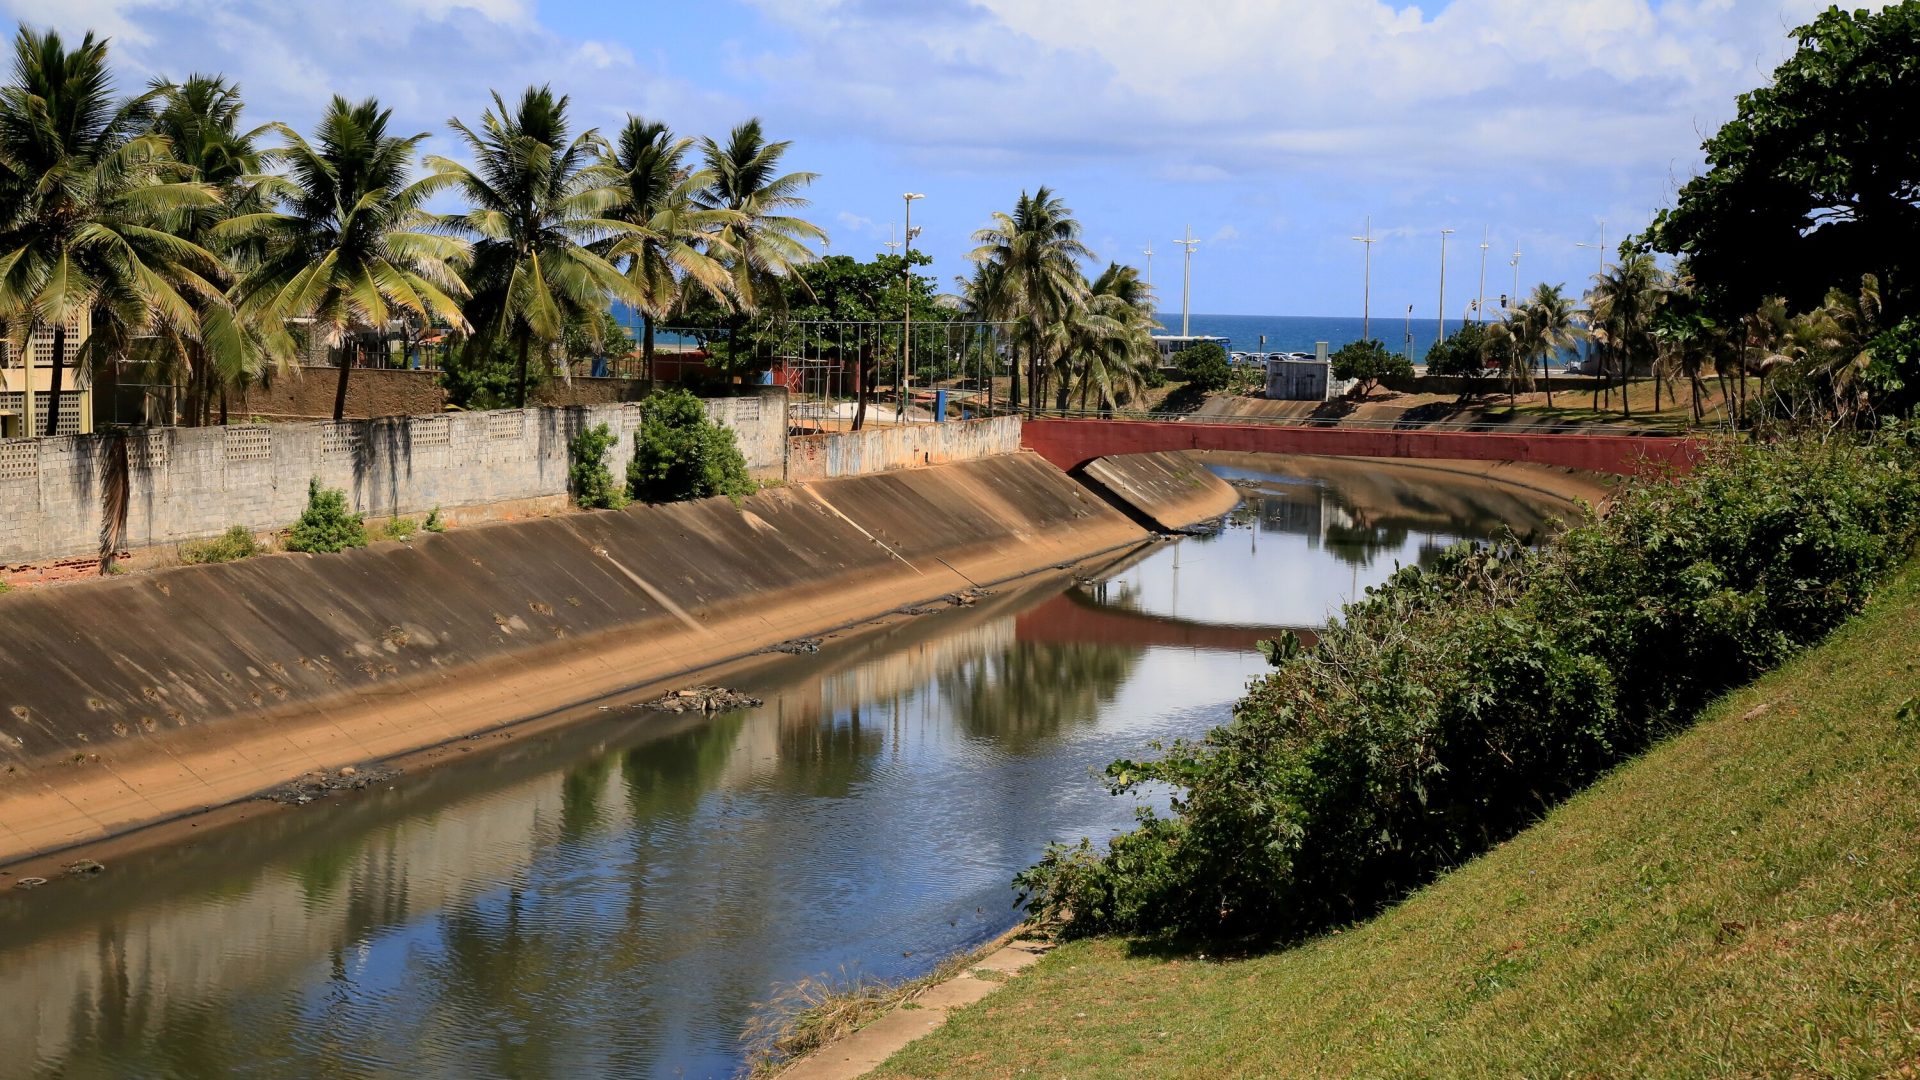 Water companies in Brazil are now benefitting from Riventa's SAS (Software as a Service) model